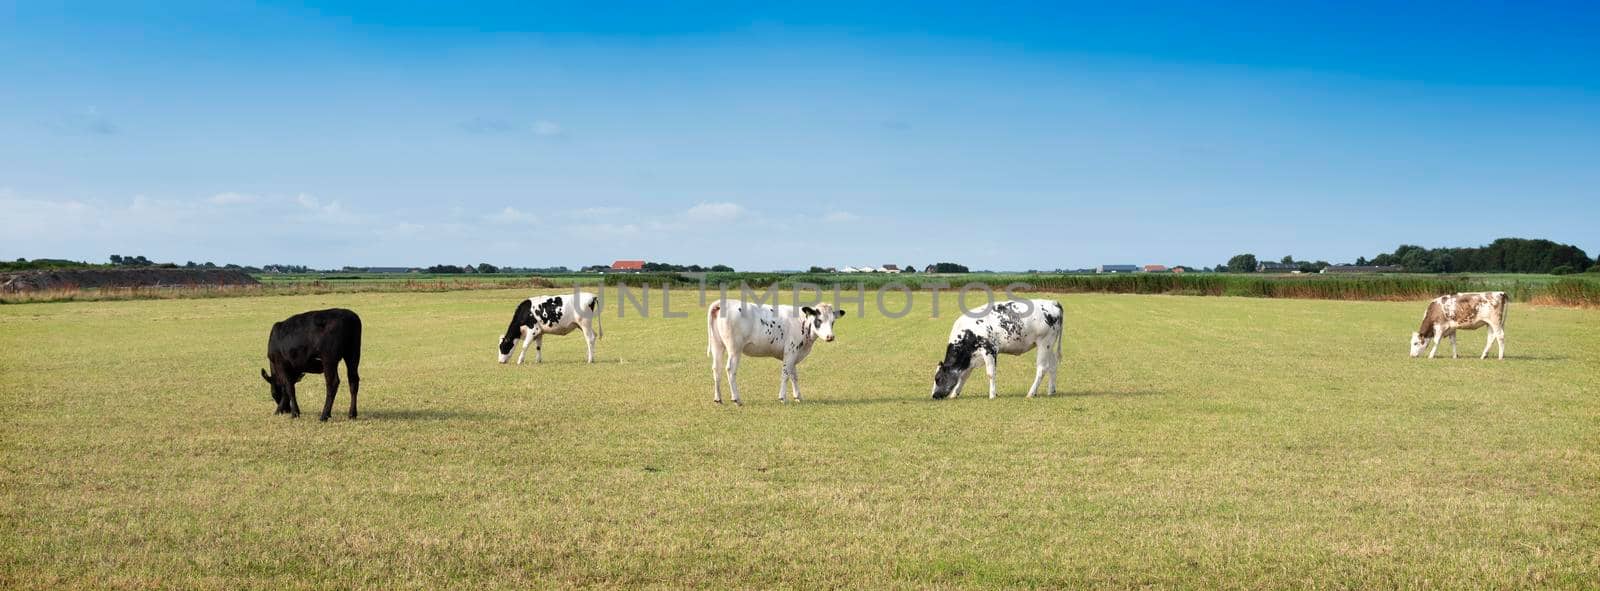 young spotted cows in green grass of meadow under blue sky on dutch island of texel in summer by ahavelaar